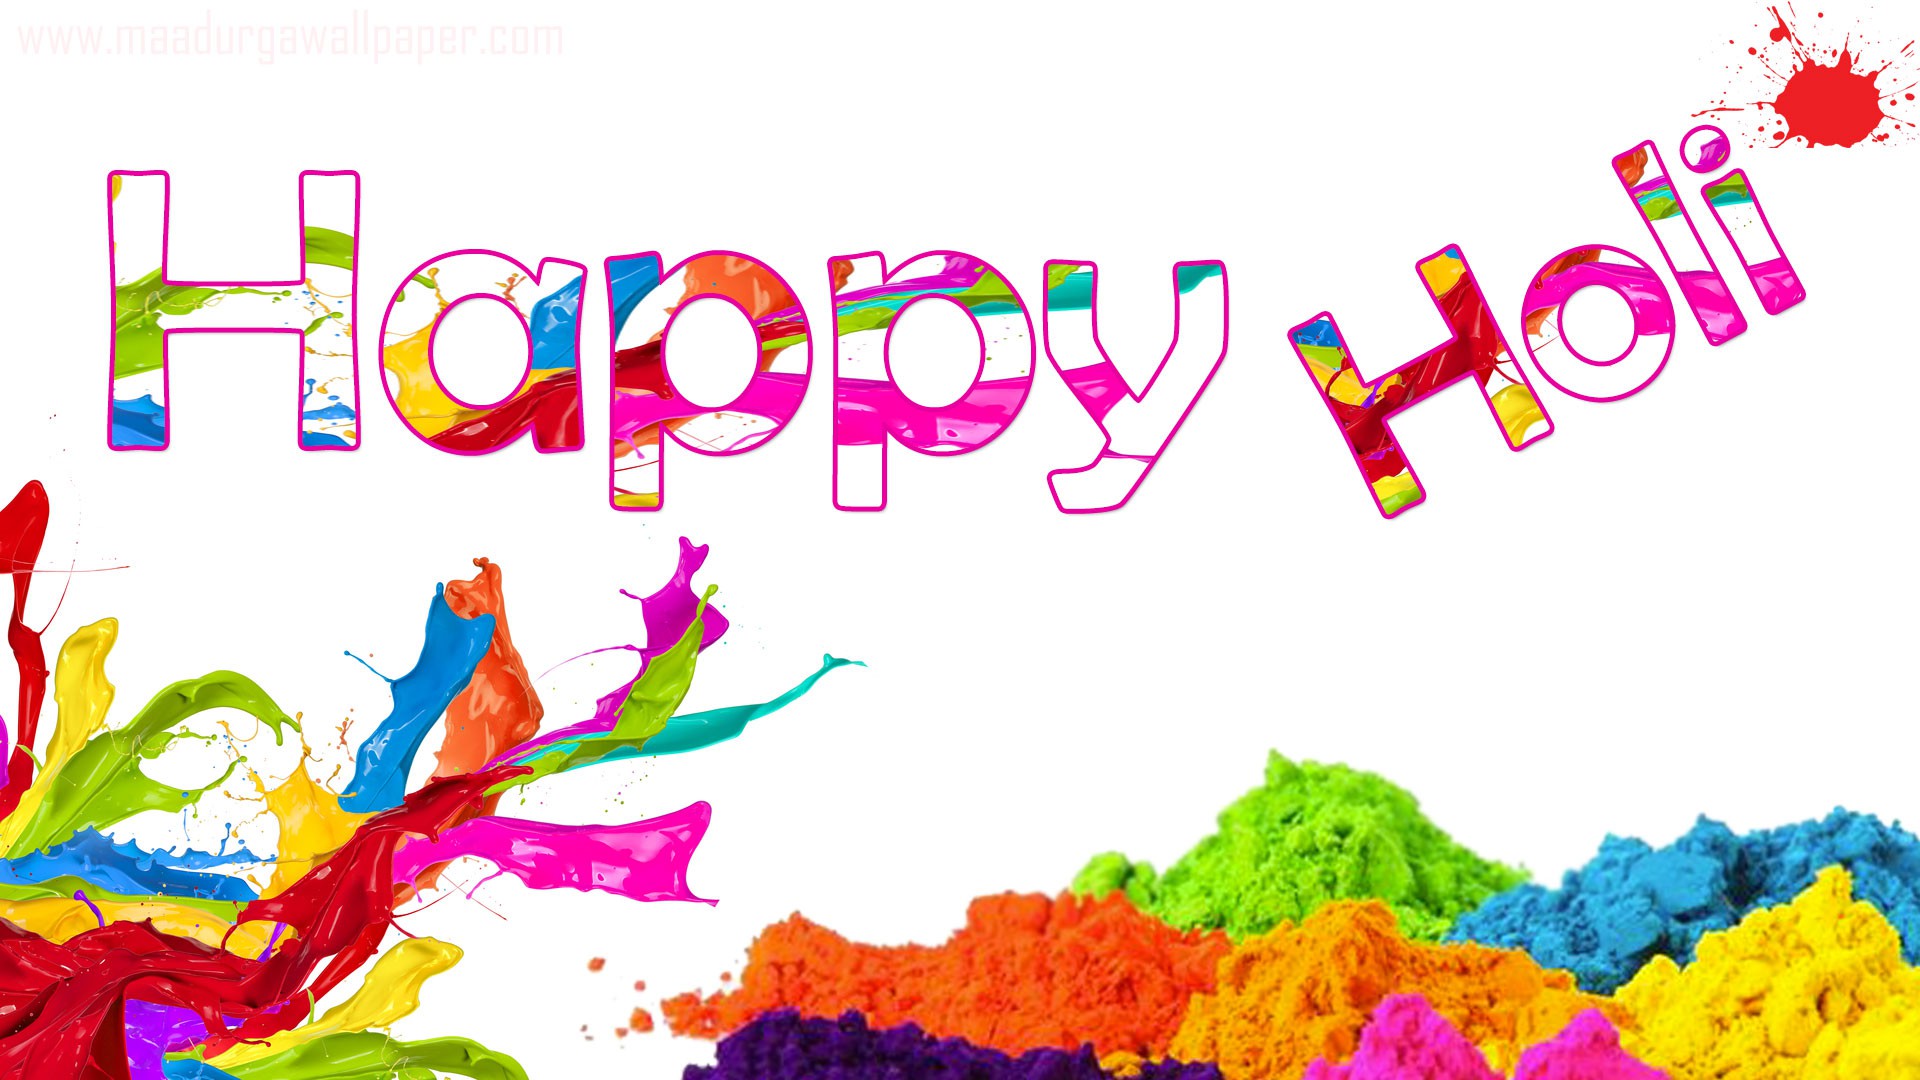 Spread Love On This Happy Holi 2020 With These Photos Wishes